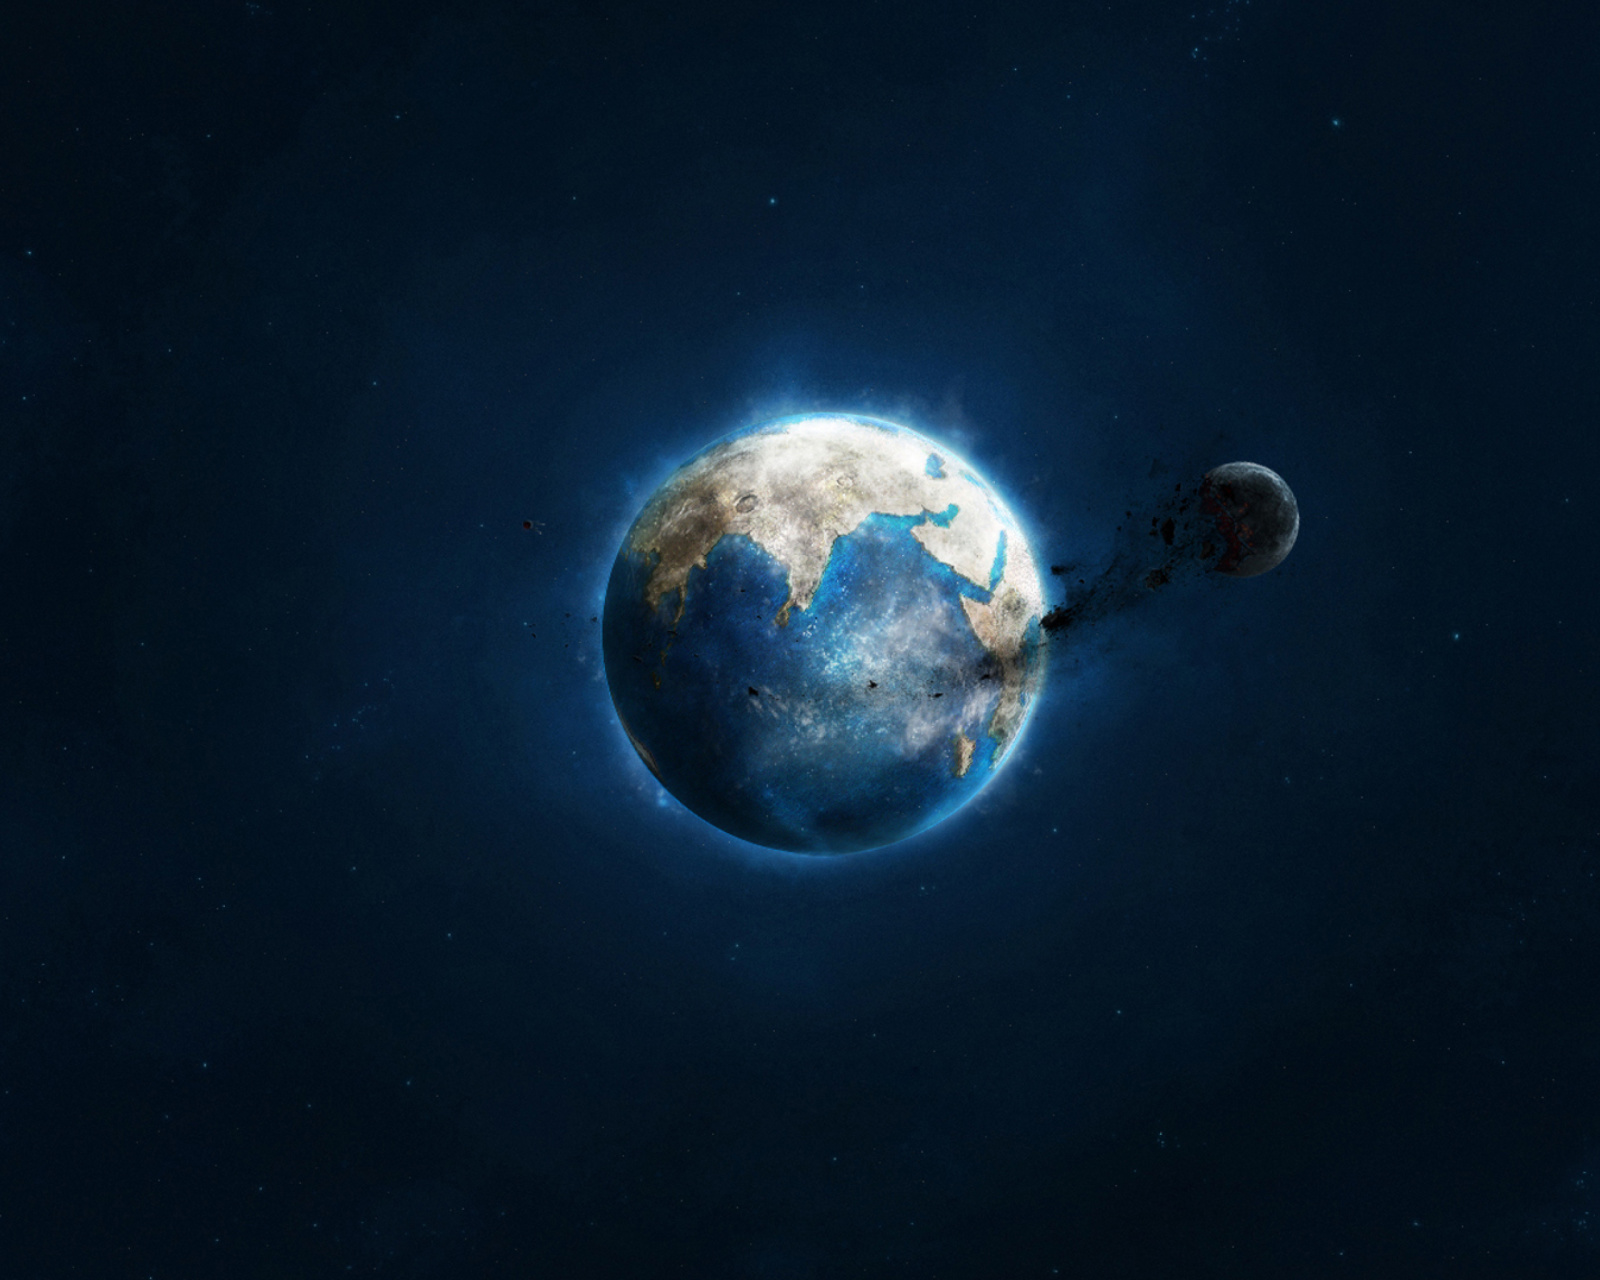 Das Planet and Asteroid Wallpaper 1600x1280